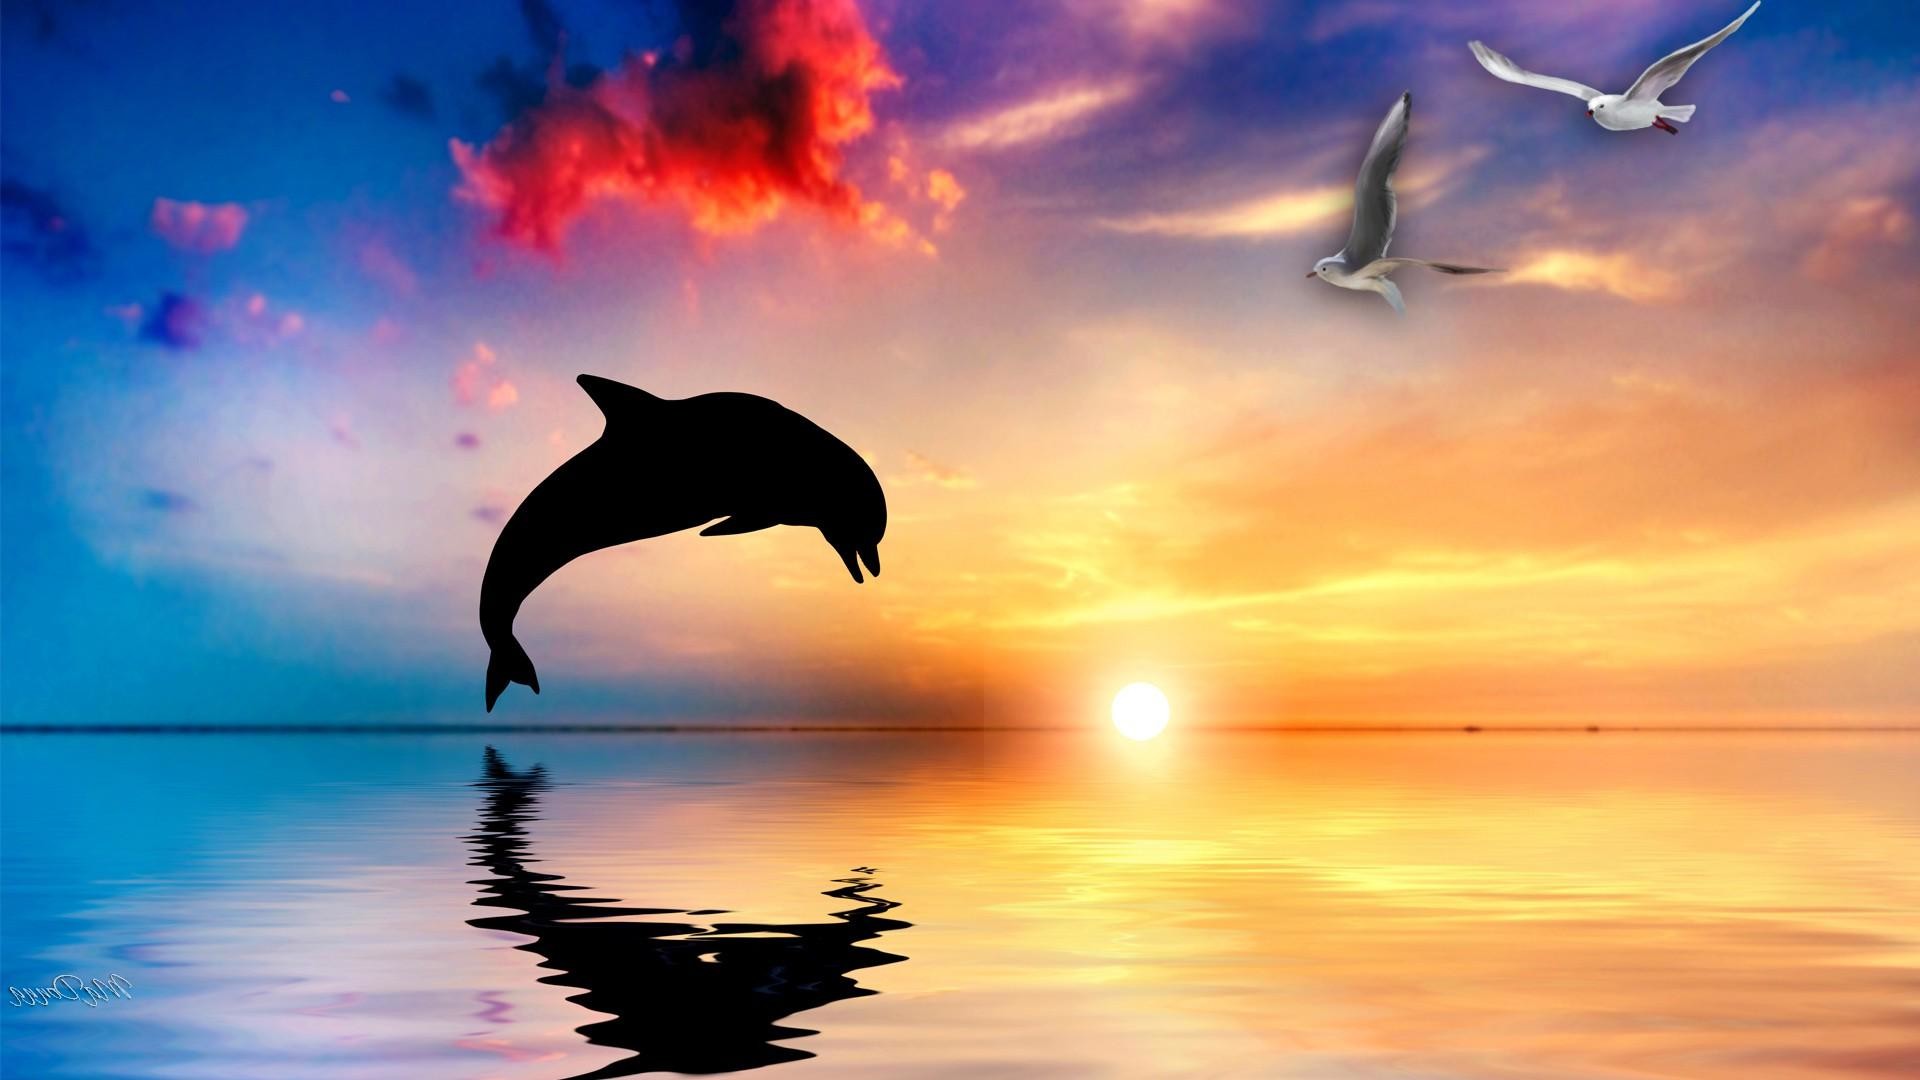 Dolphin HD Wallpapers and Backgrounds | HD Wallpapers | Pinterest |  Wallpaper, Hd wallpaper and Wallpaper backgrounds